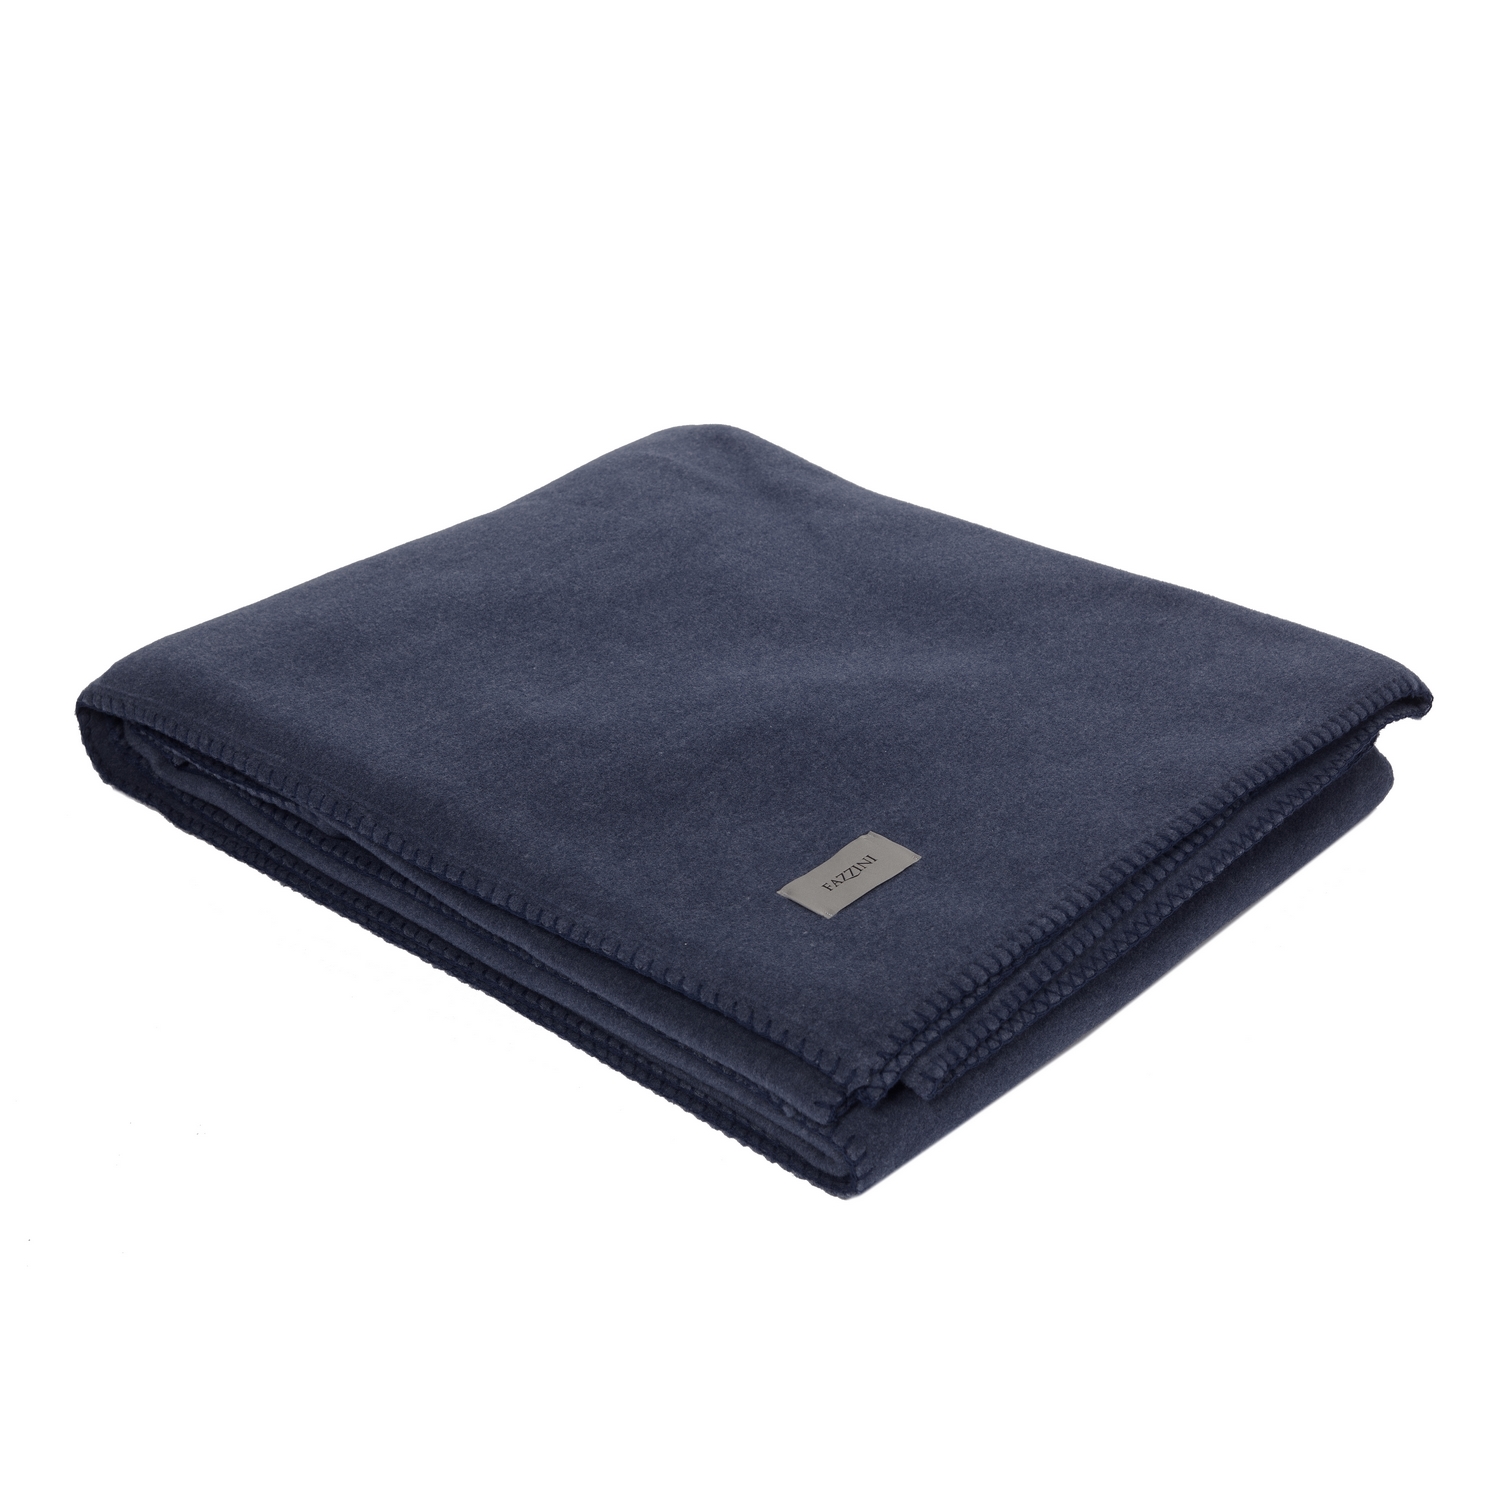 LUCY Blanket -240x210 - BLUE